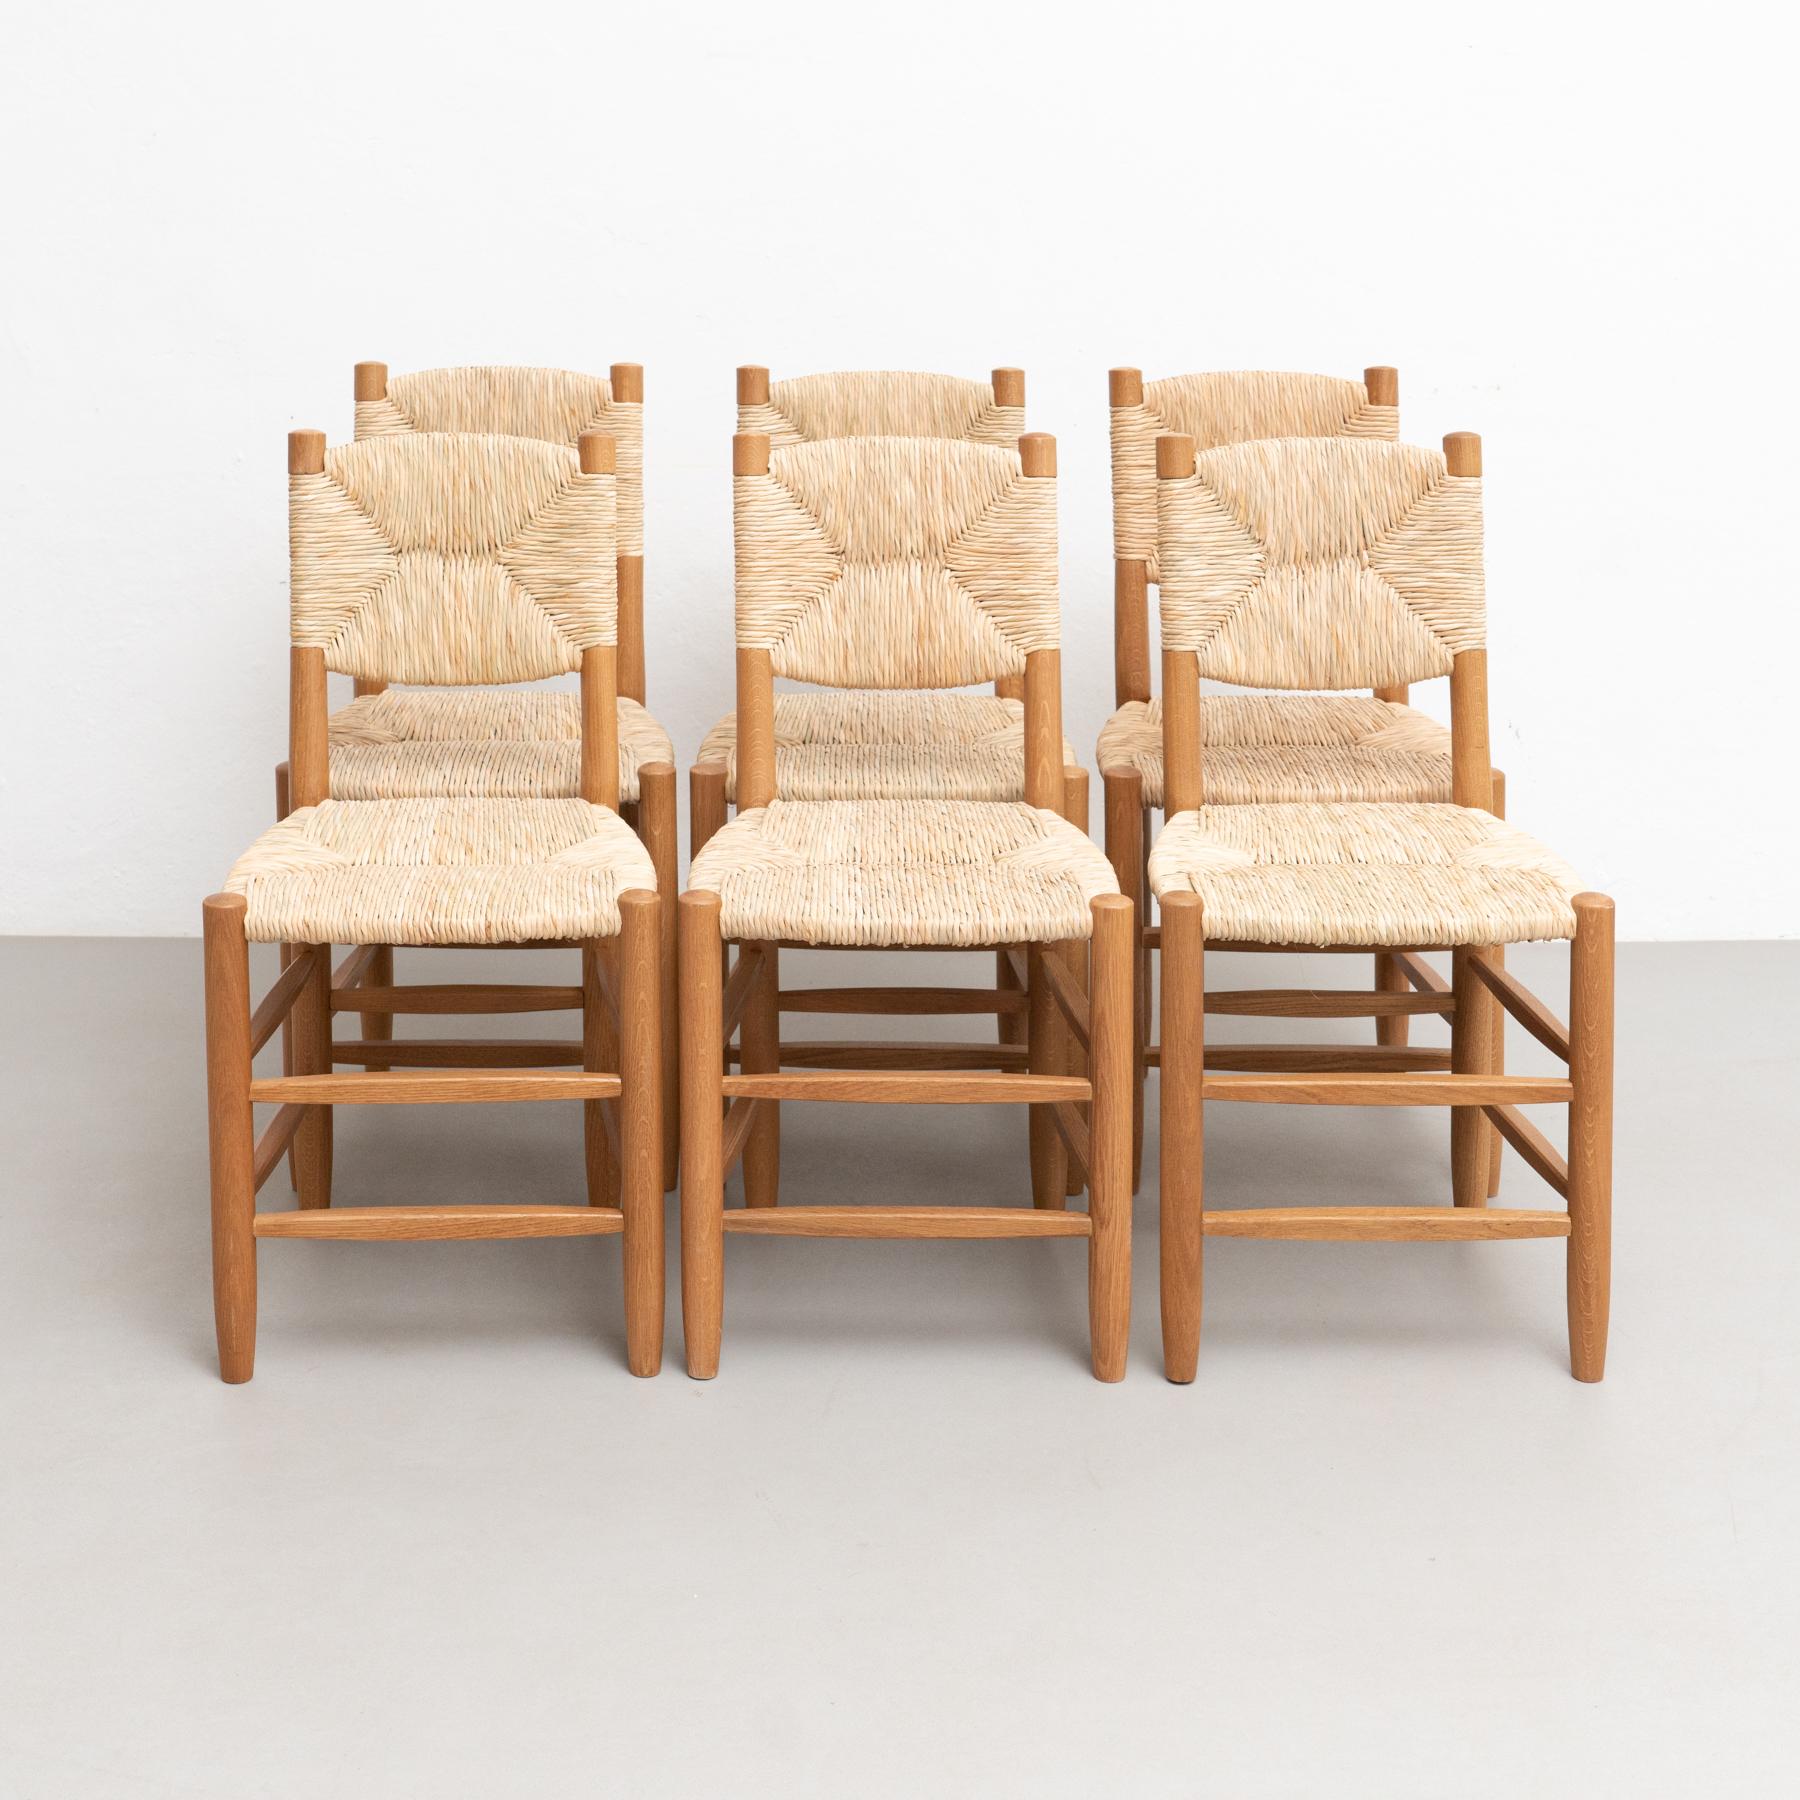 Set of 6 After Charlotte Perriand n.19 Chairs, Wood Rattan, Mid-Century Modern For Sale 4